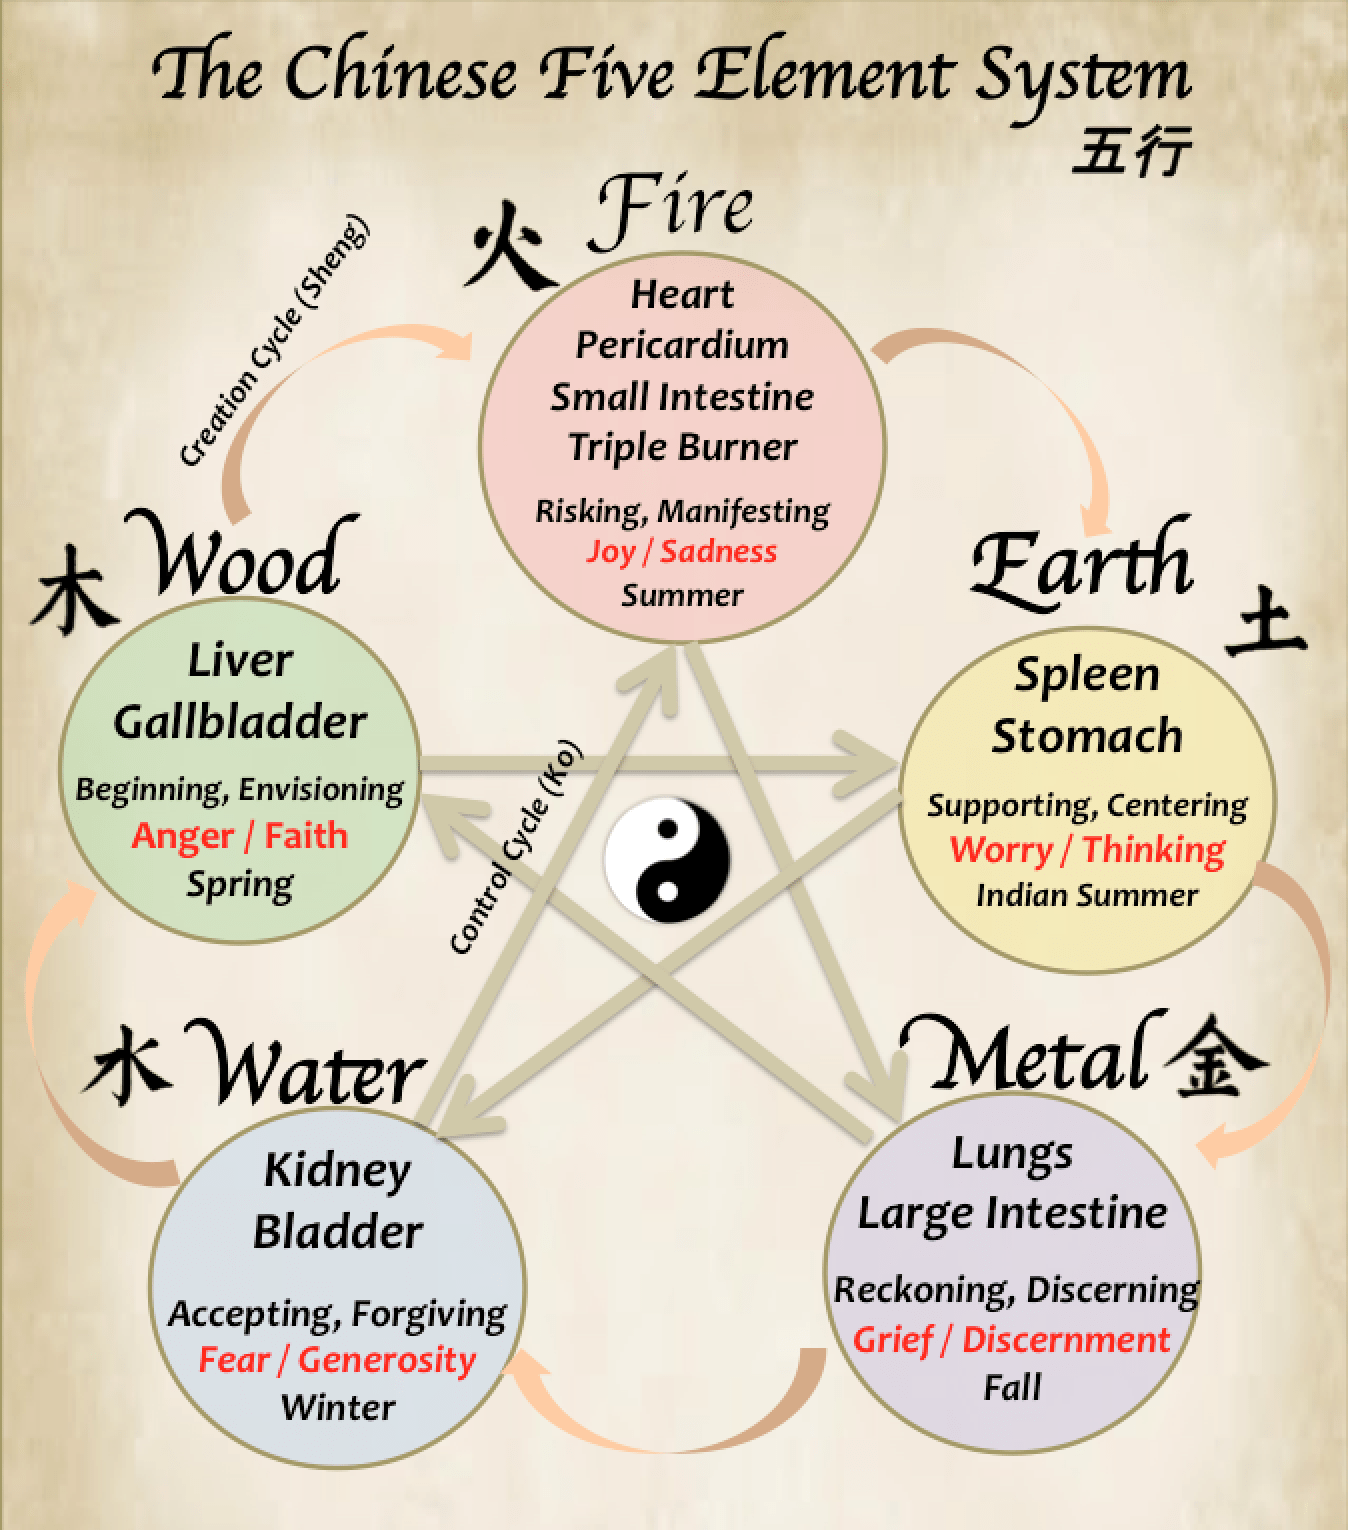 Introduction to the Chinese Five Element System